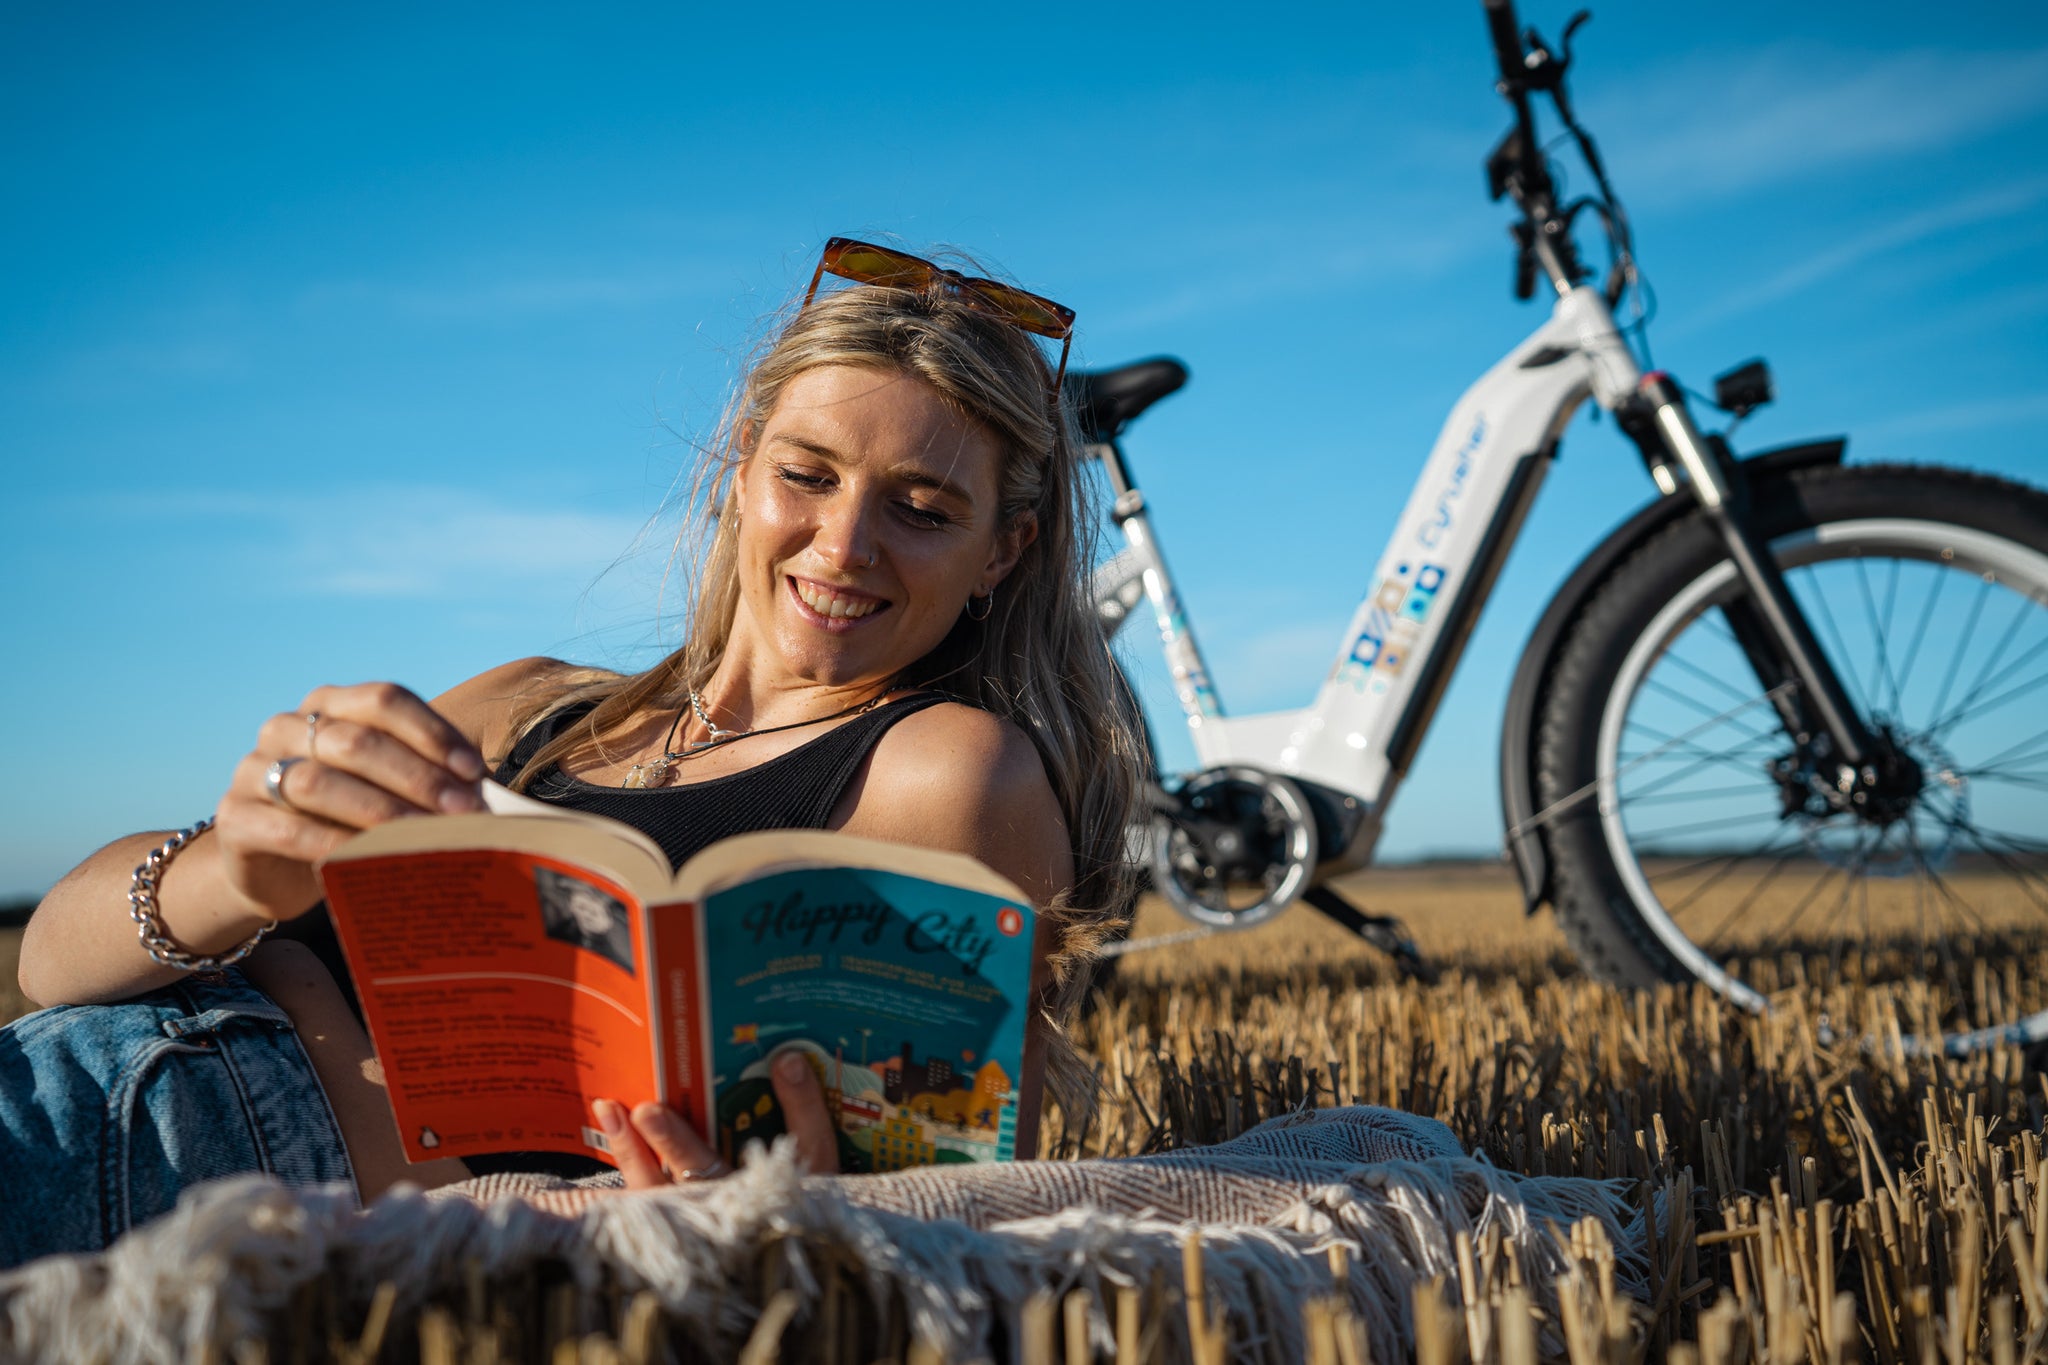 Gifts for Blog-Graduates: Select an Ebike for an Exhilarating Adventure